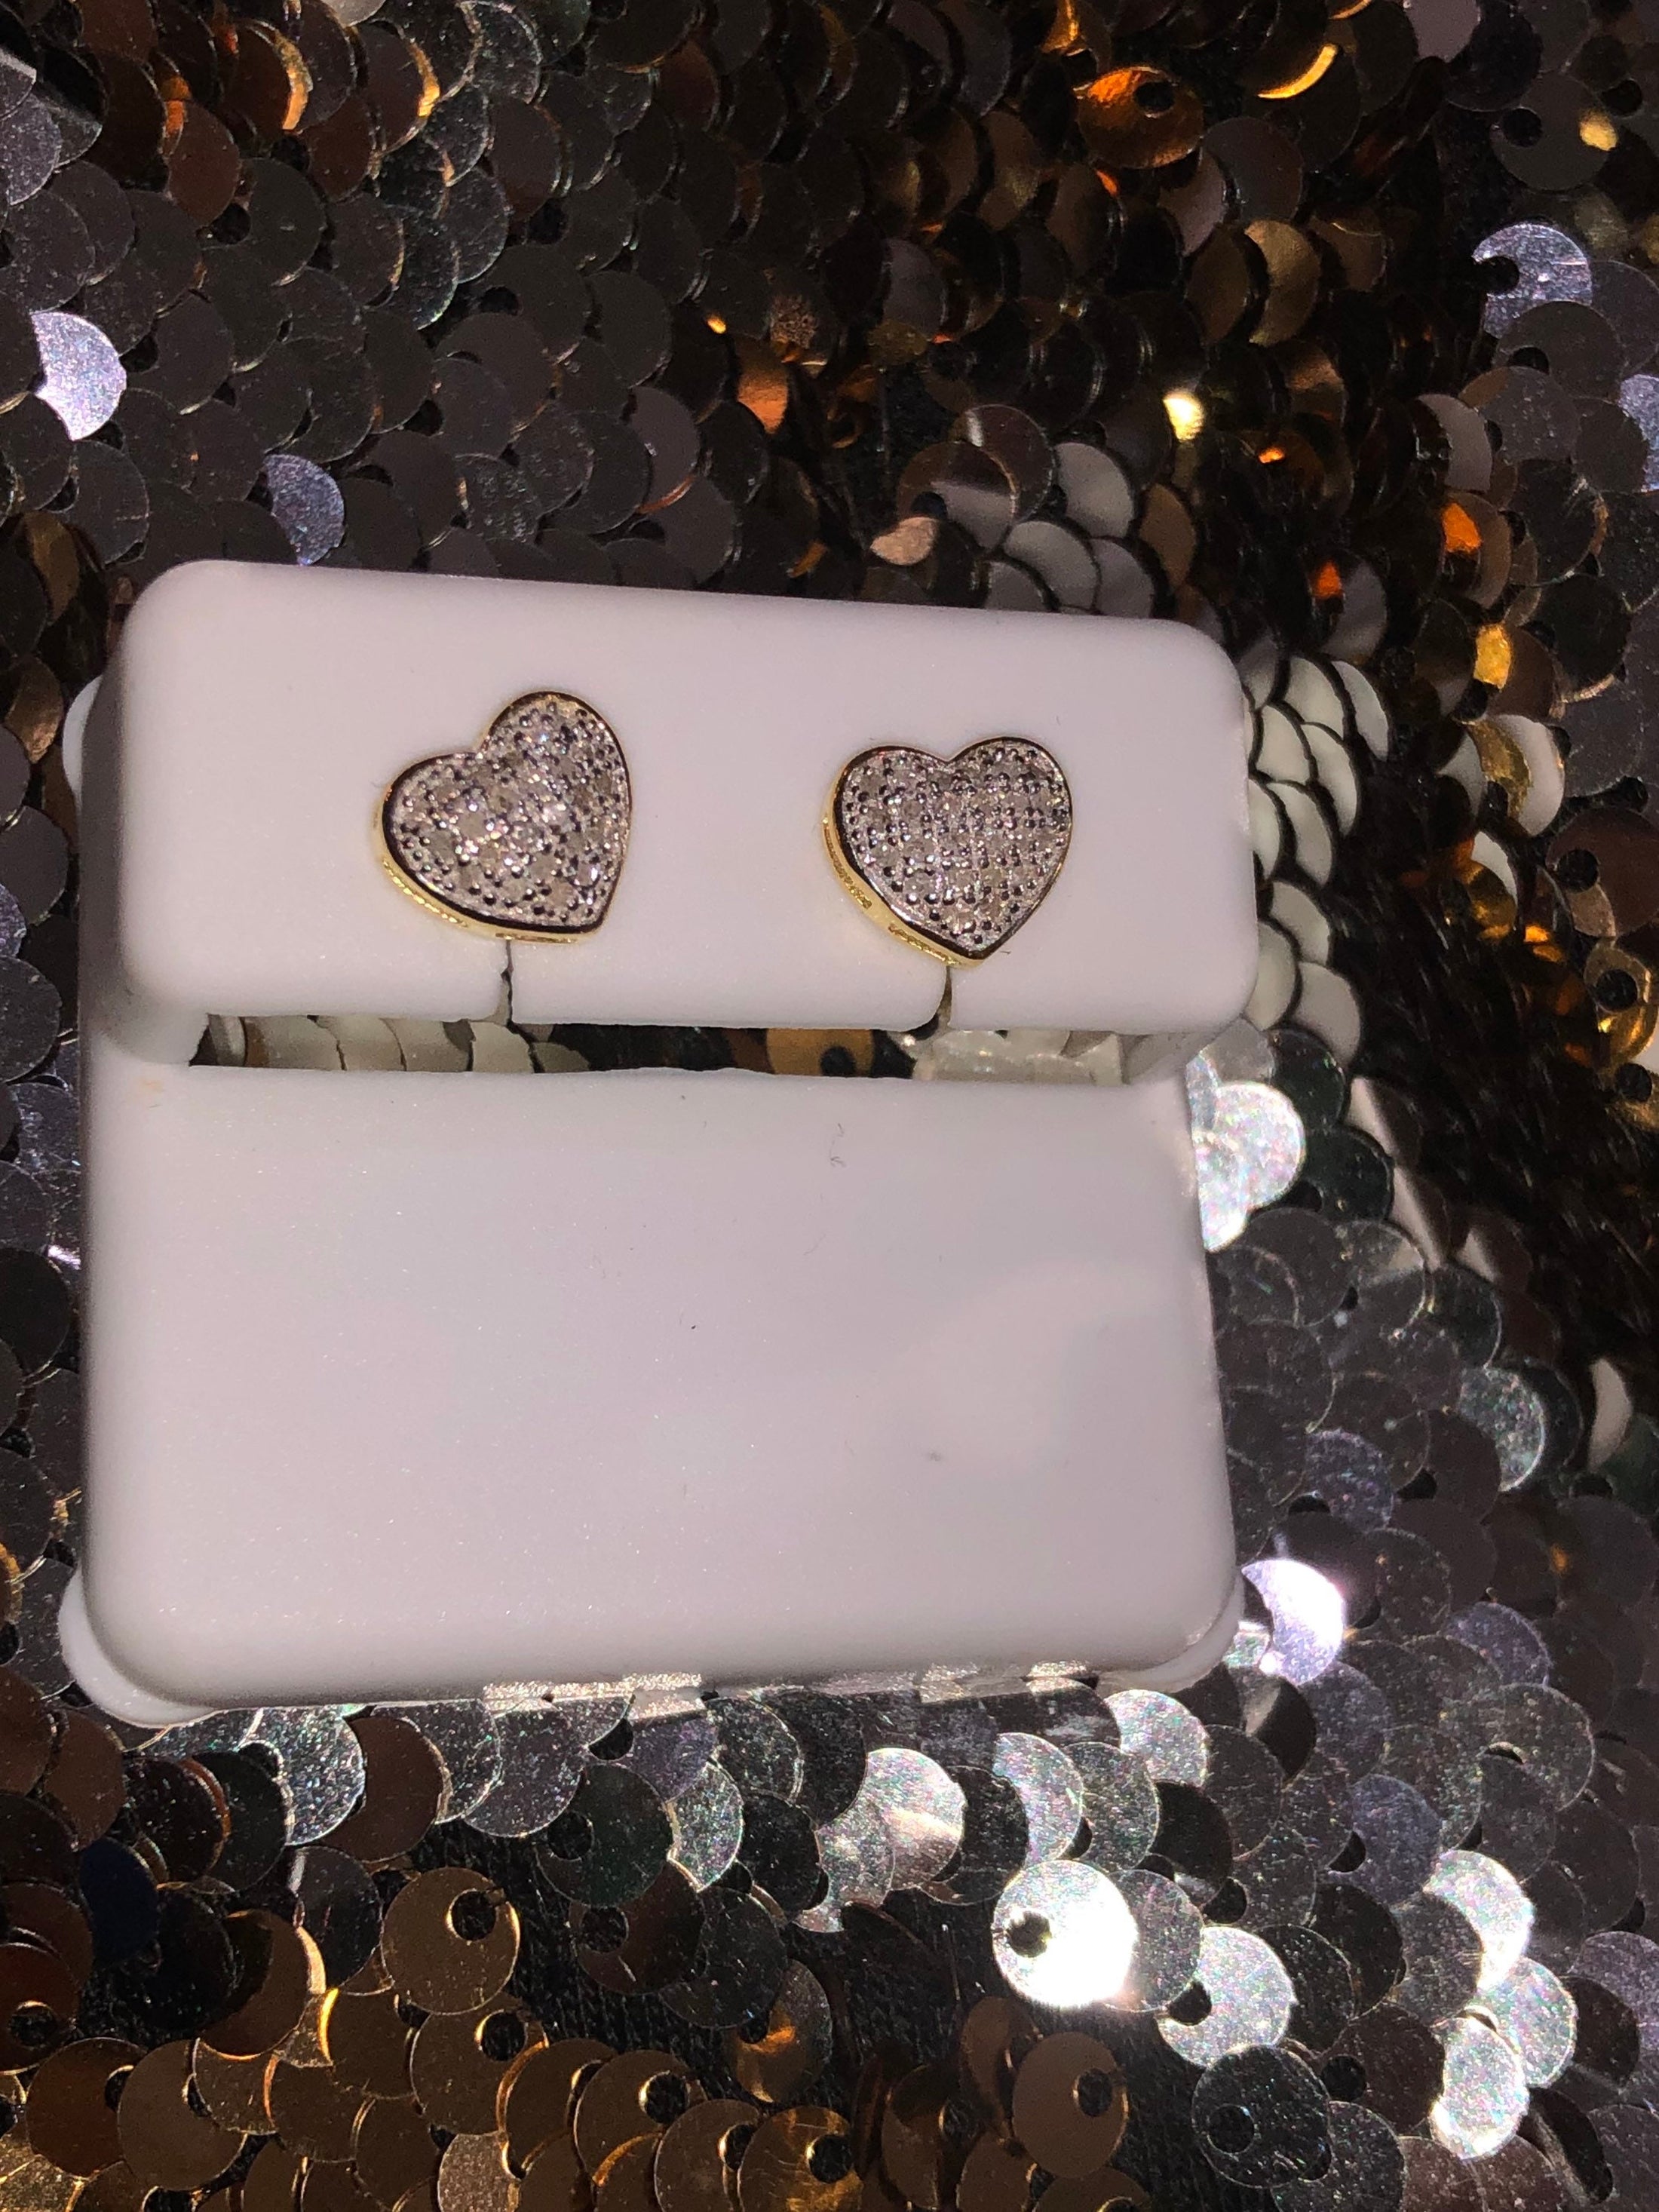 Real diamond puff heart earring stunning gift for holiday anniversary birthday wedding so beautiful huge sale limited fast shipping!